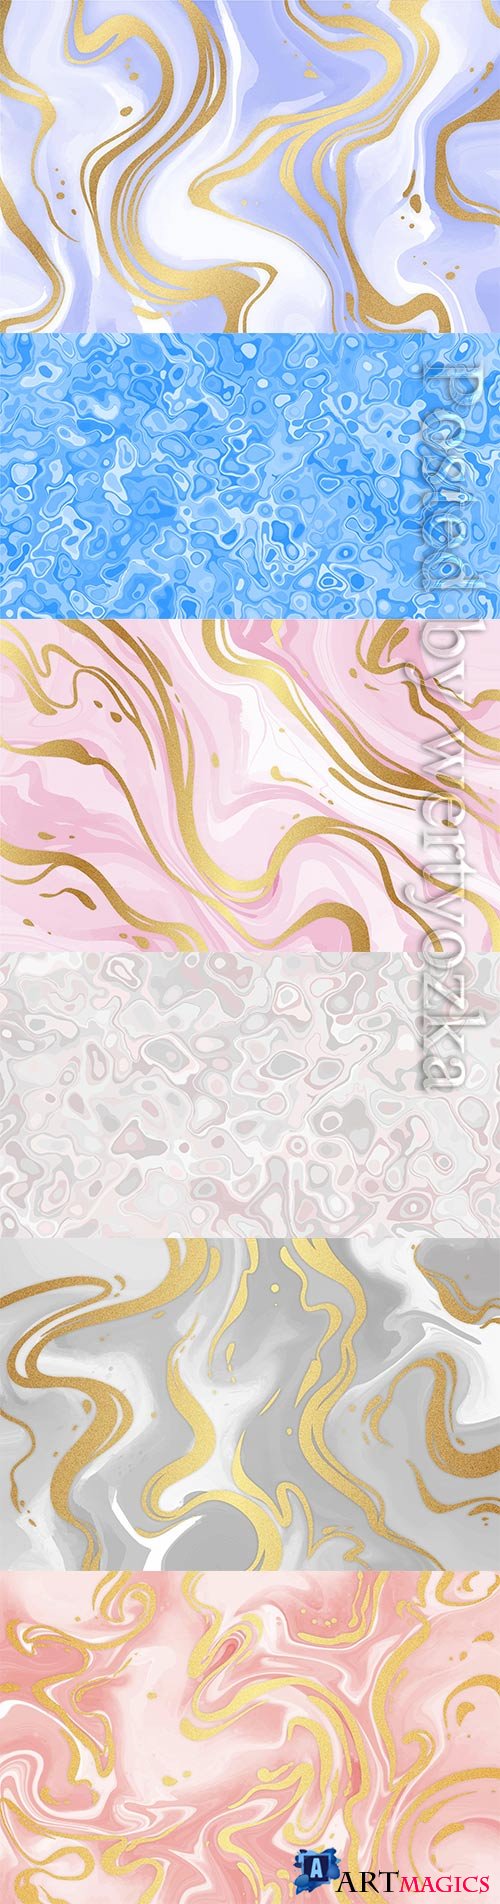 Marble backgrounds in vector